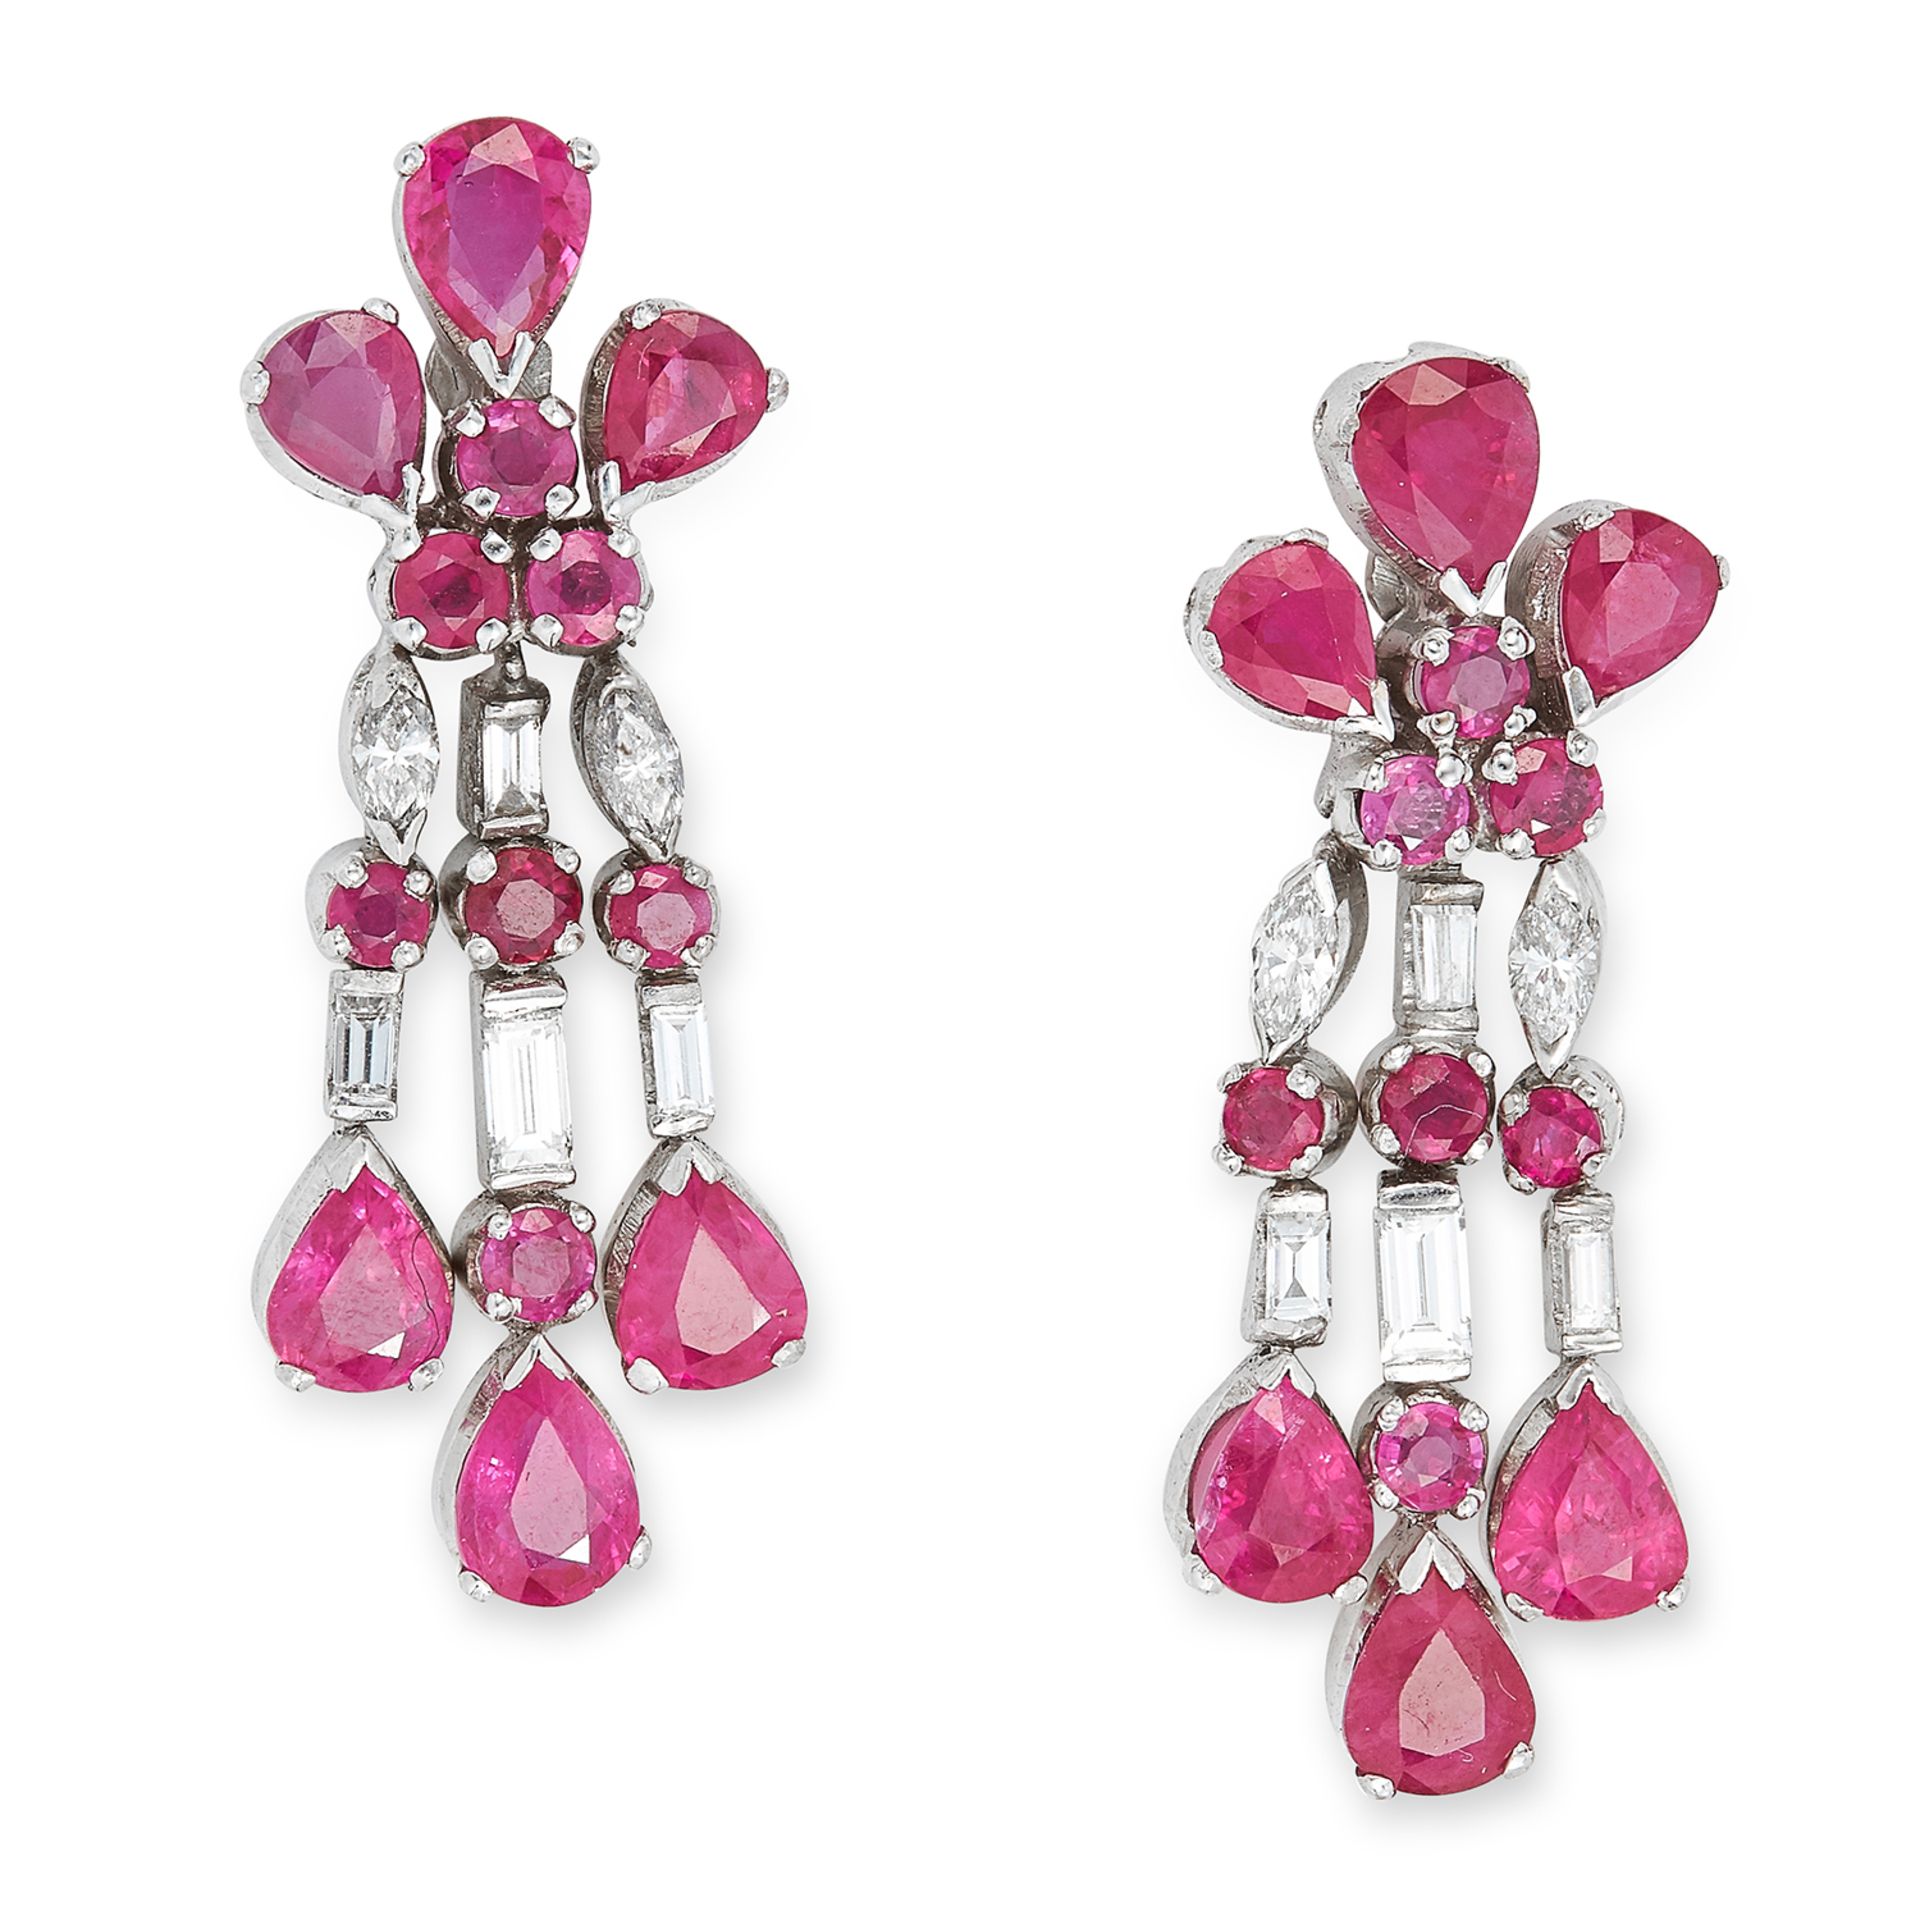 RUBY AND DIAMOND PENDENT EARRINGS set with rubies and diamonds, each suspending a trio of